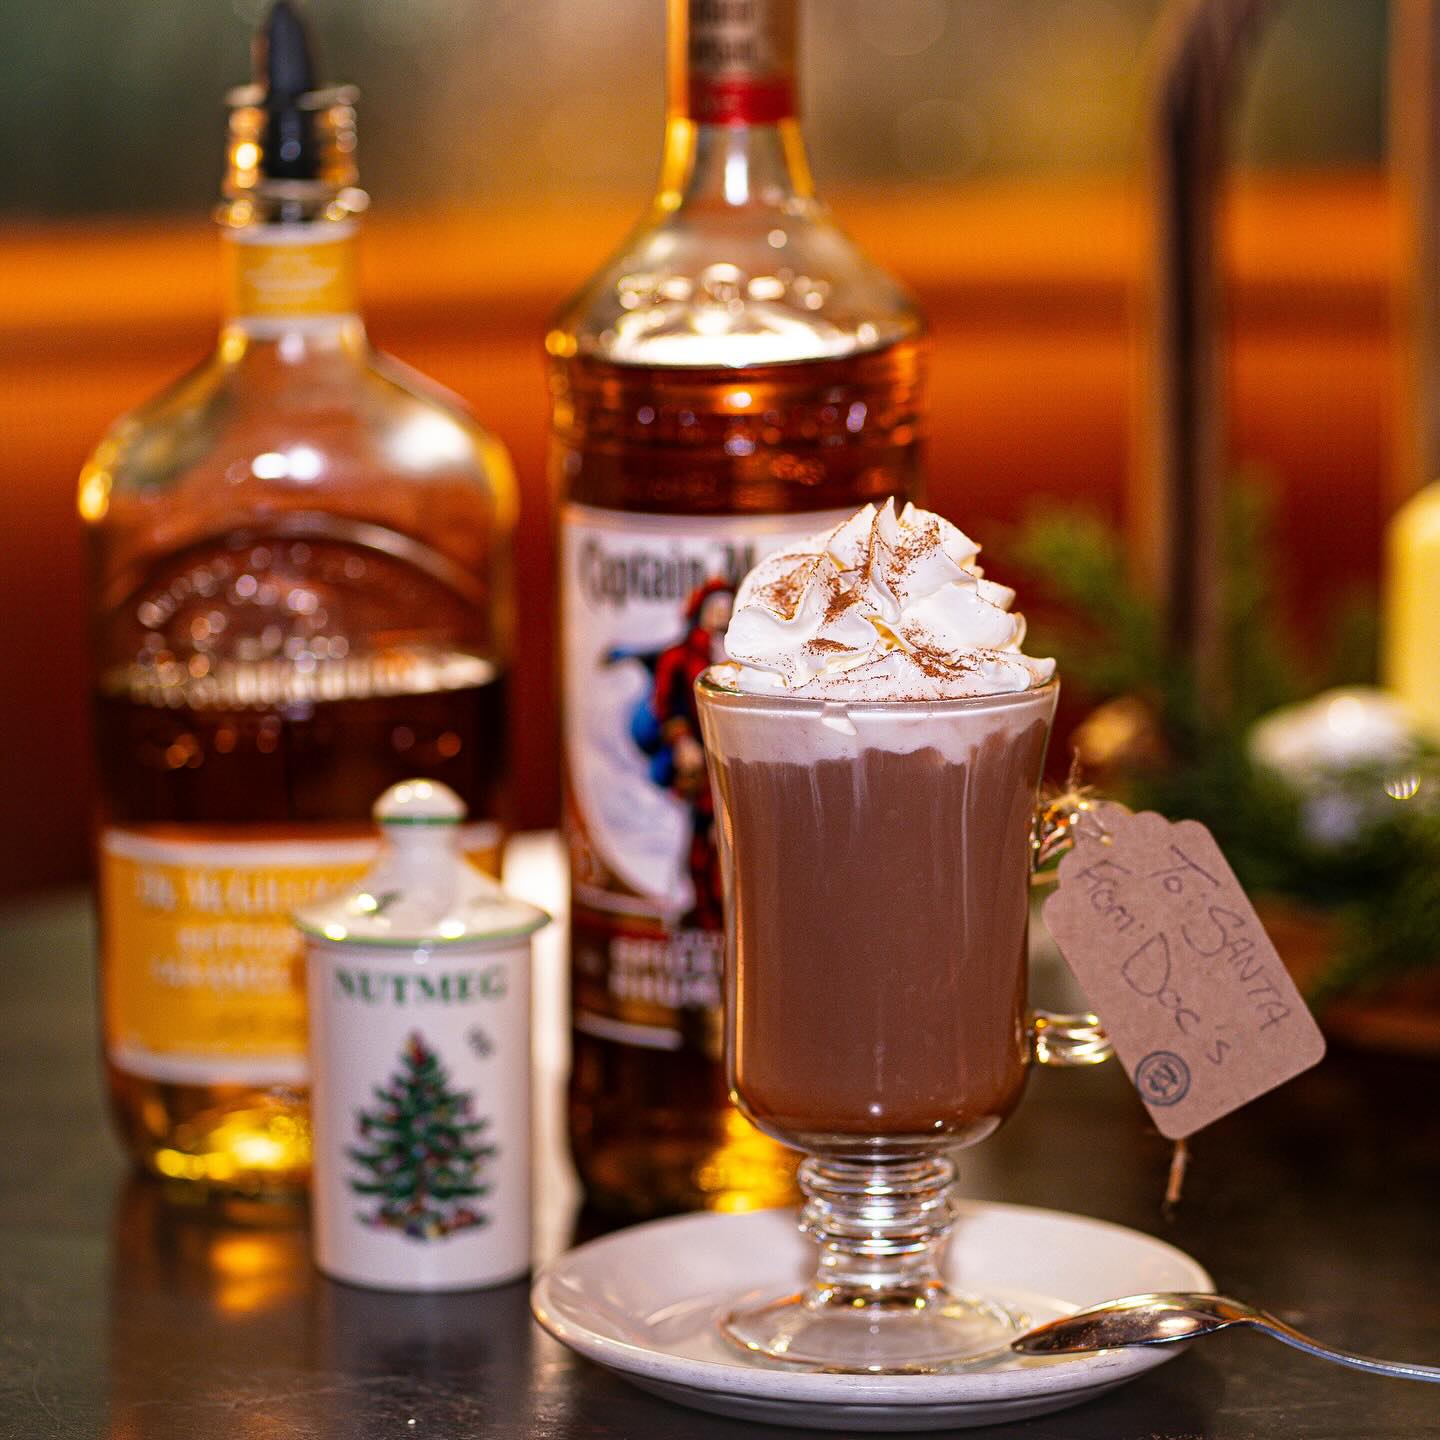 Photo of a cup of hot chocolate with a couple liquor bottles in the background.